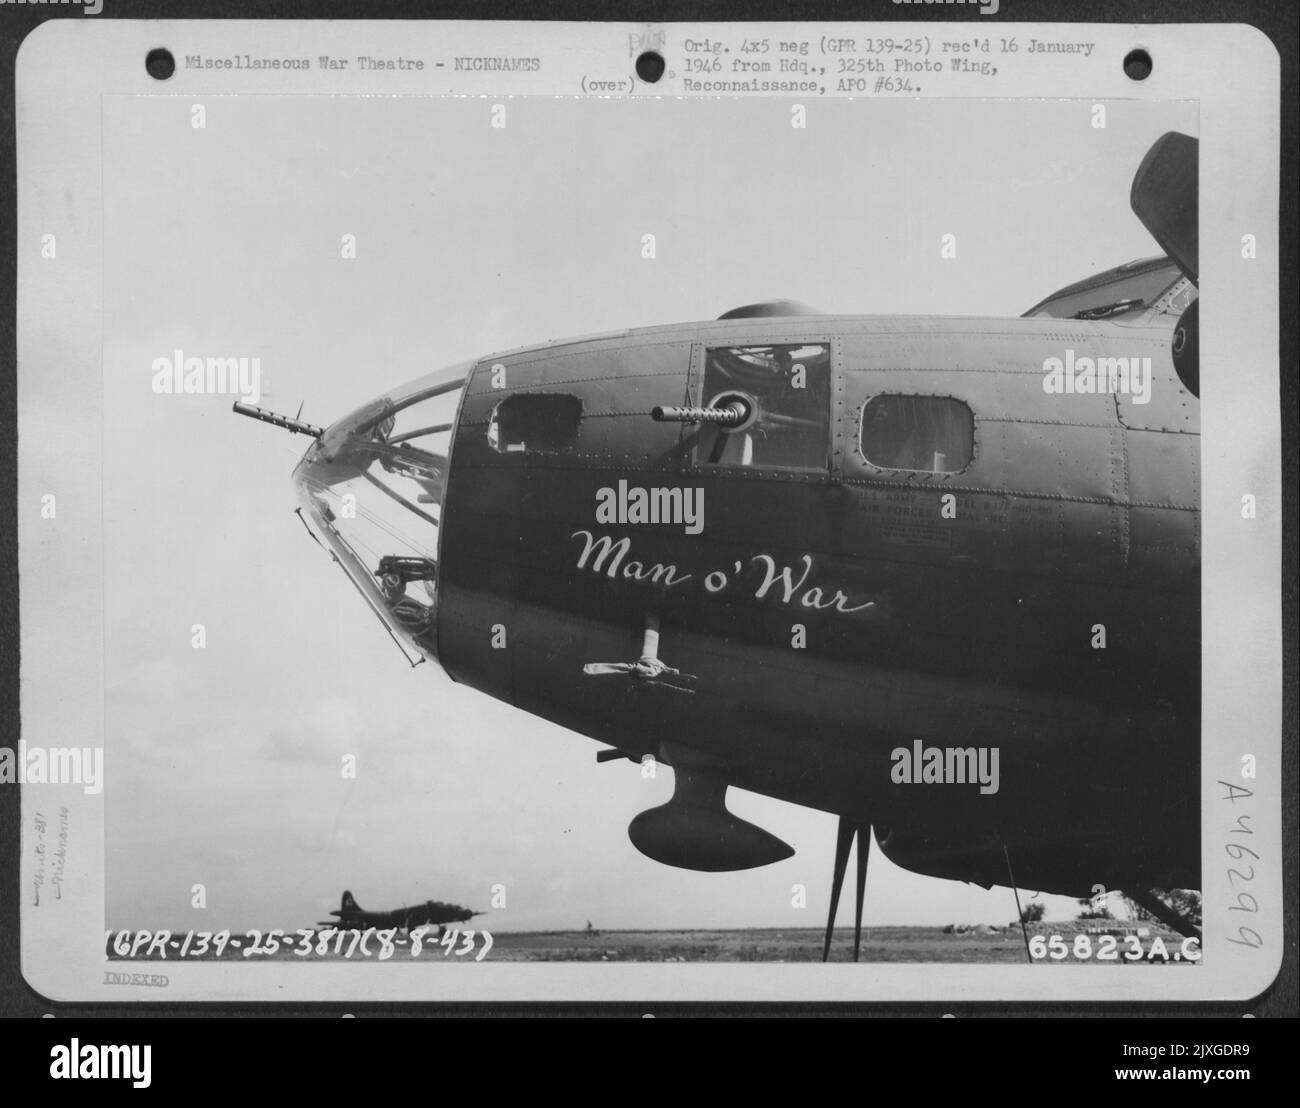 The Boeing B-17 